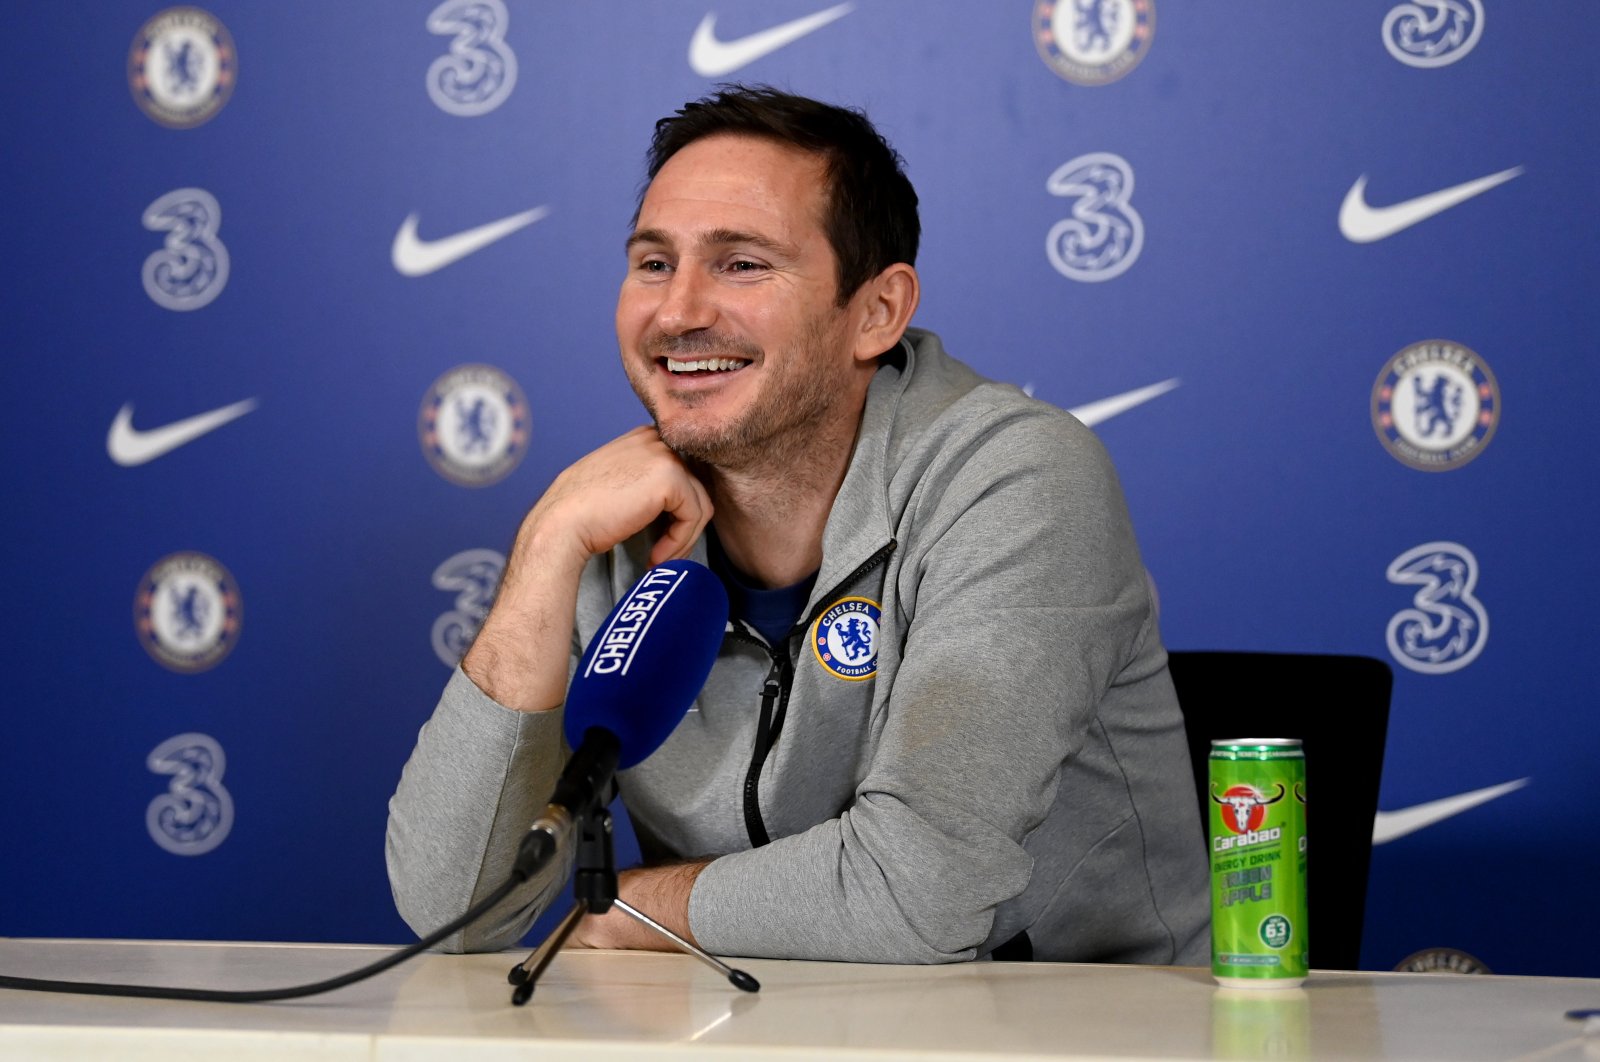 Ex-Chelsea coach Frank Lampard during a news conference at Chelsea Training Ground, Cobham, U.K., Jan.18, 2021. (Getty Images Photo)